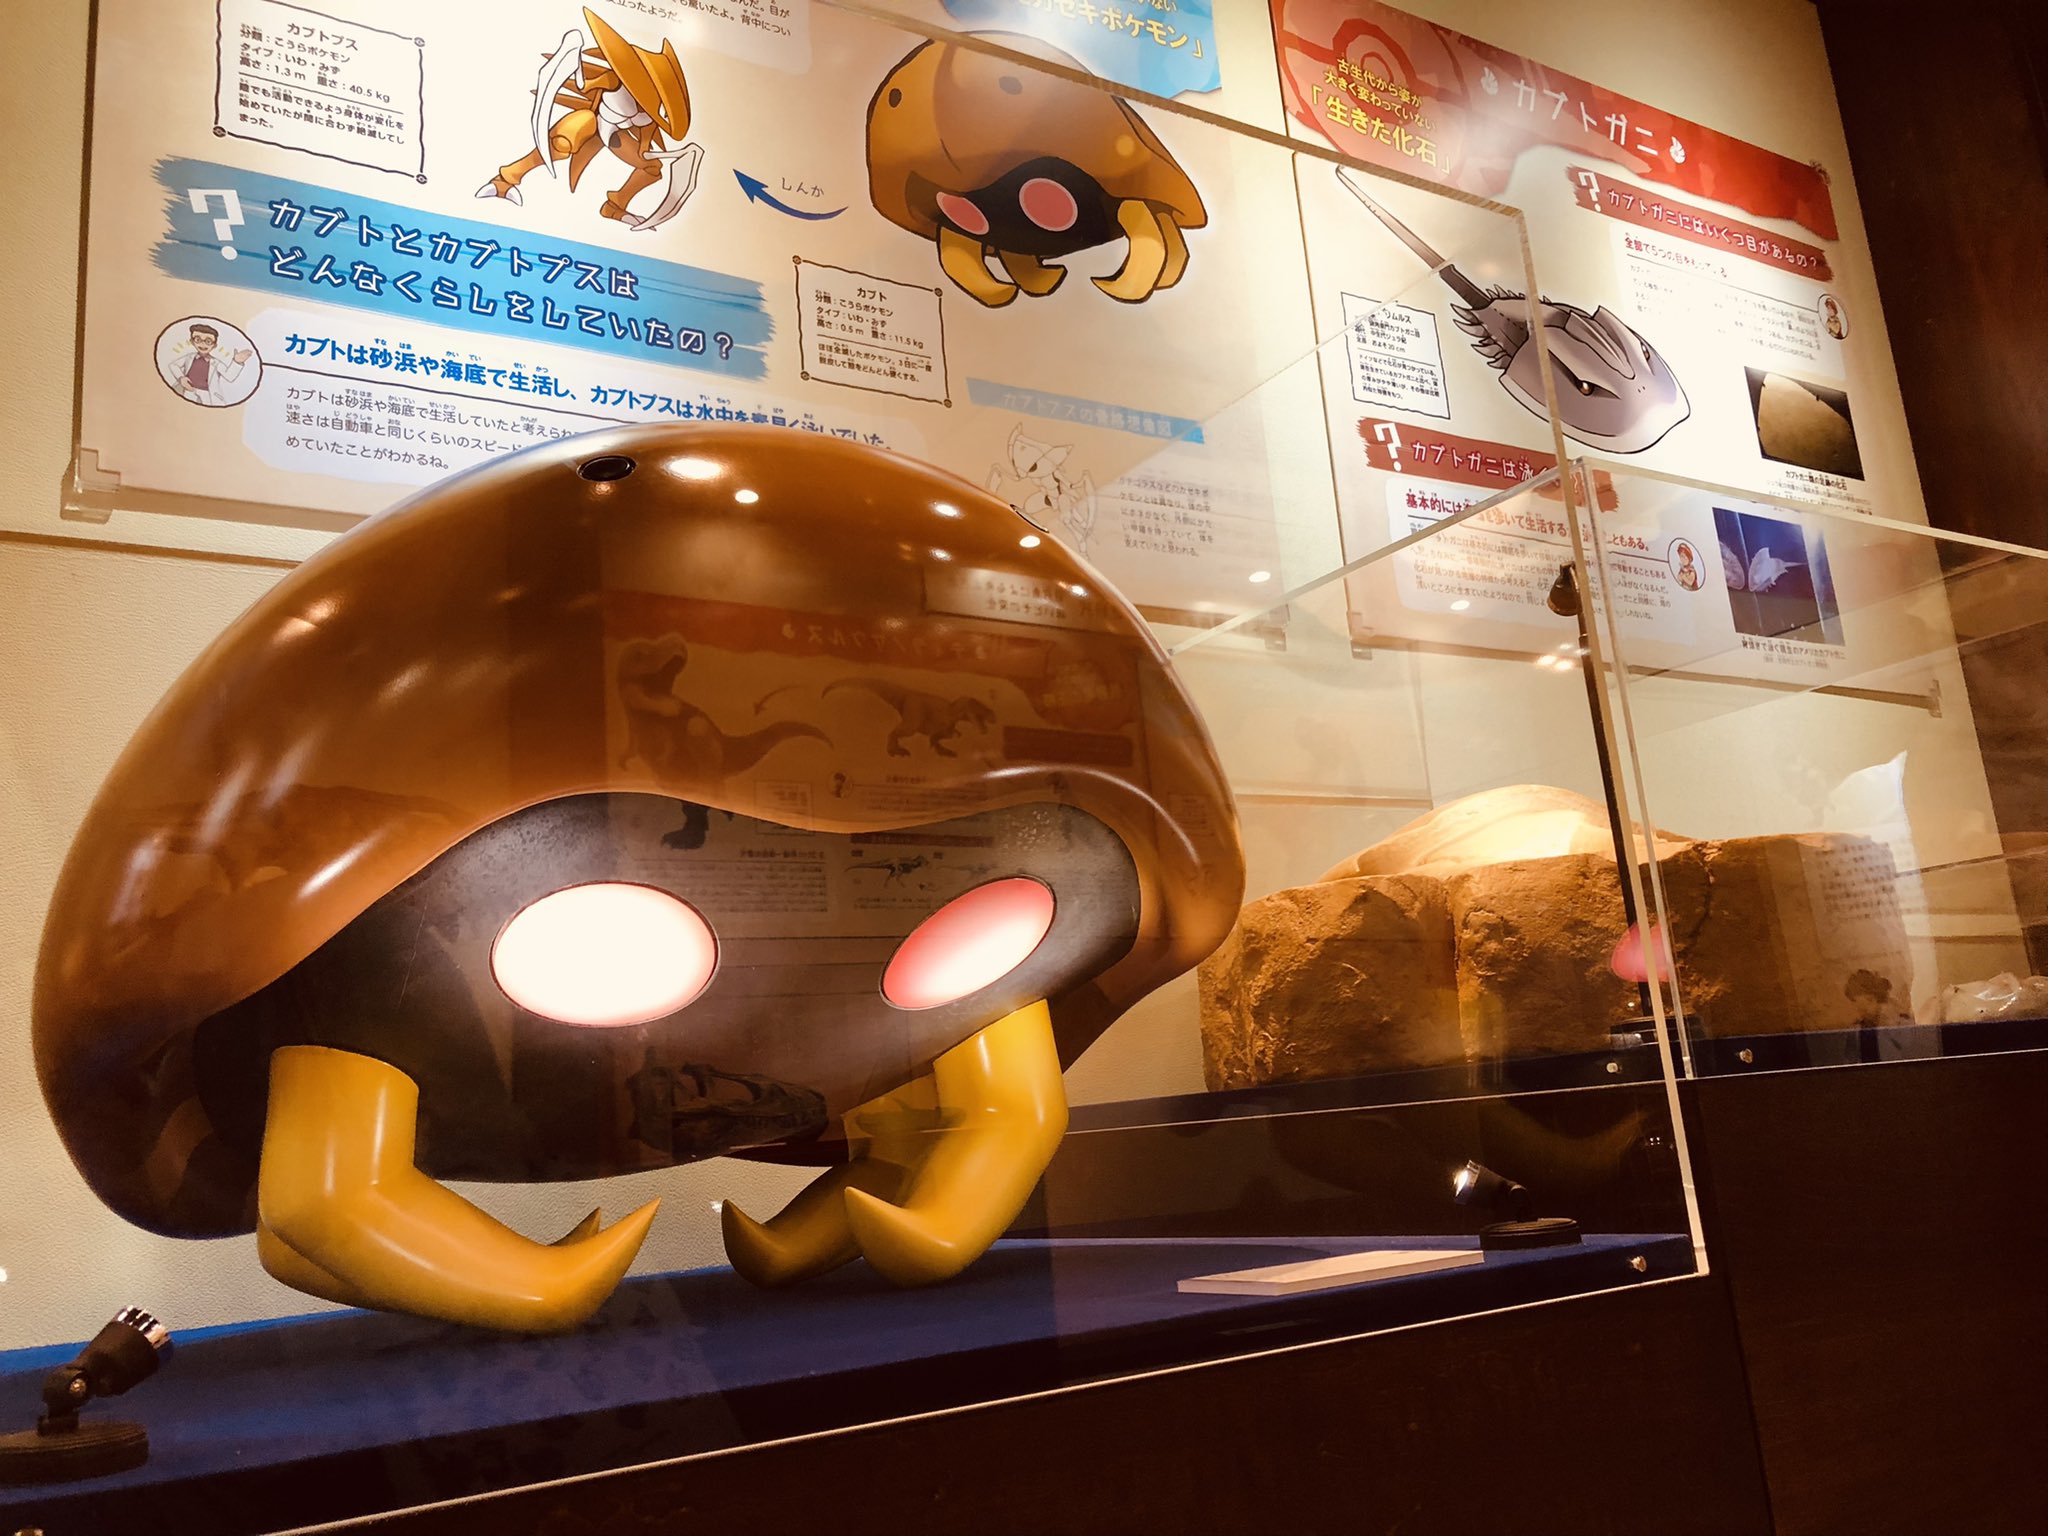 Toine Lay ポケモン化石博物館は凄く楽しかったわ ポケモン 化石 ってまさに子供の頃の夢が実現した感じで最高 Just Visited The Pokemon Fossil Museum In Hokkaido 10 Years Old Antoine Would Have Probably Passed Out From Sheer Excitement In